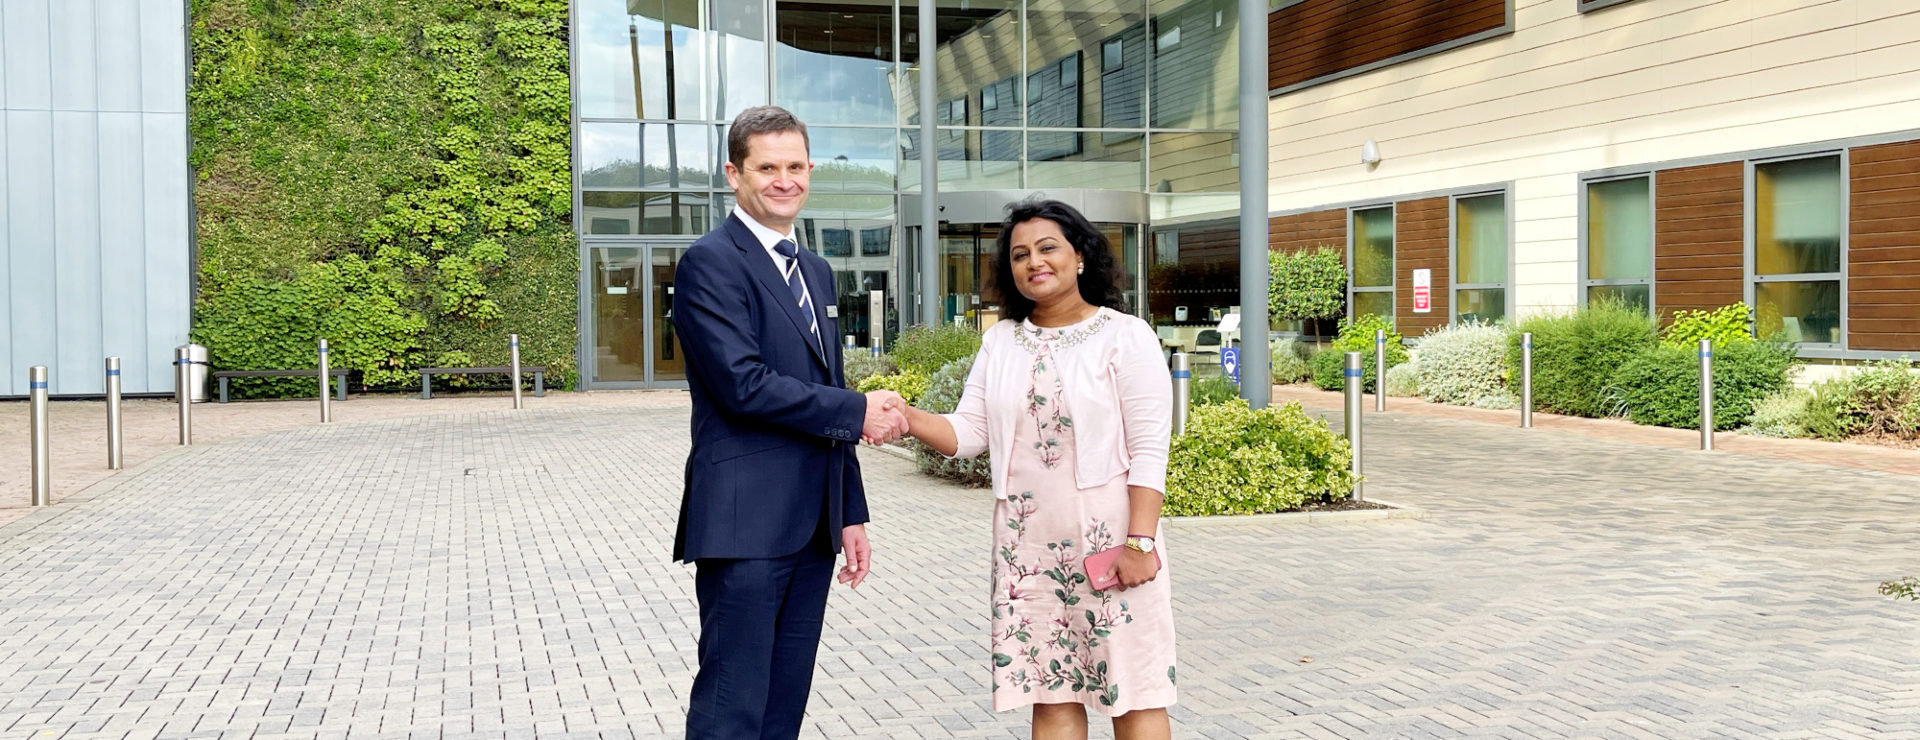 KIMS Hospital CEO, Simon James, and LycaHealth Chair, Prema Subaskaran are pictured shaking hands to celebrate the investment.